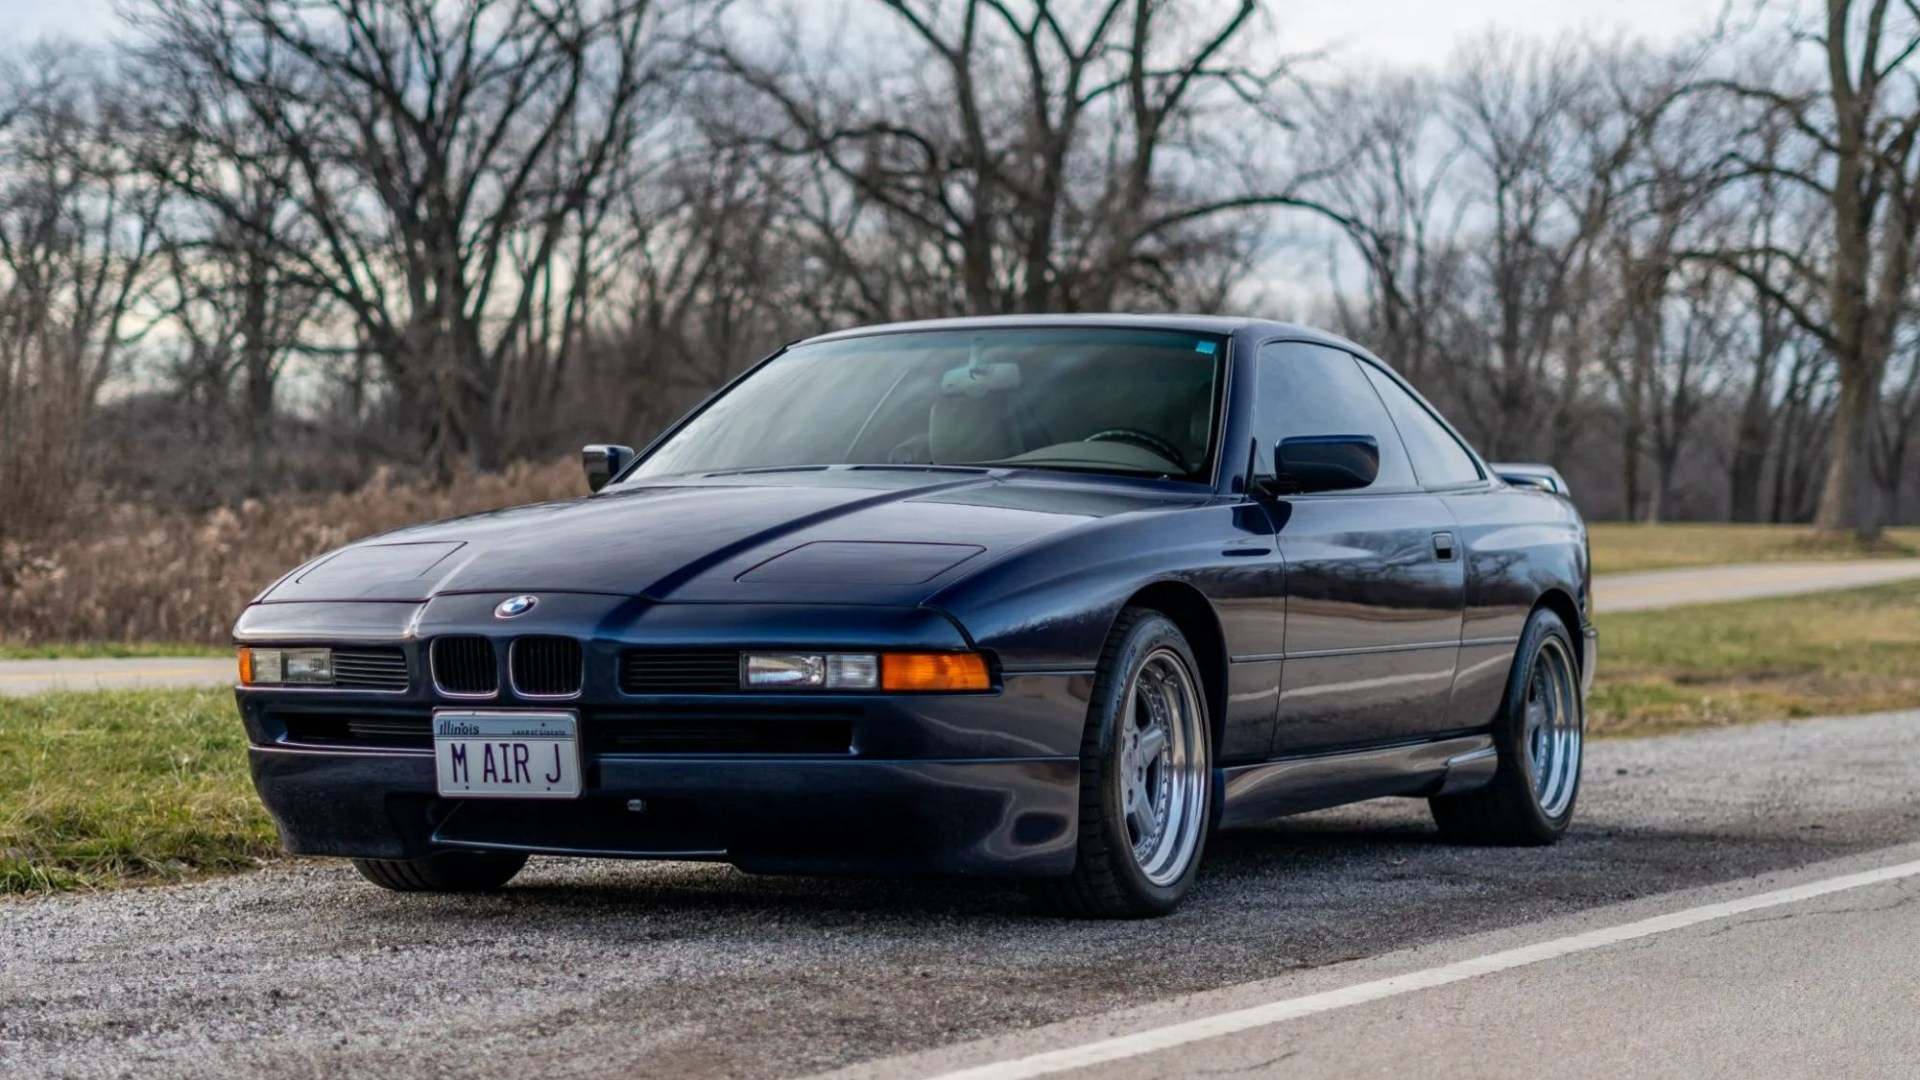 BMW supercar once owned by Michael Jordan up for sale – it’s packed with 90s-era luxury & is ‘ta…